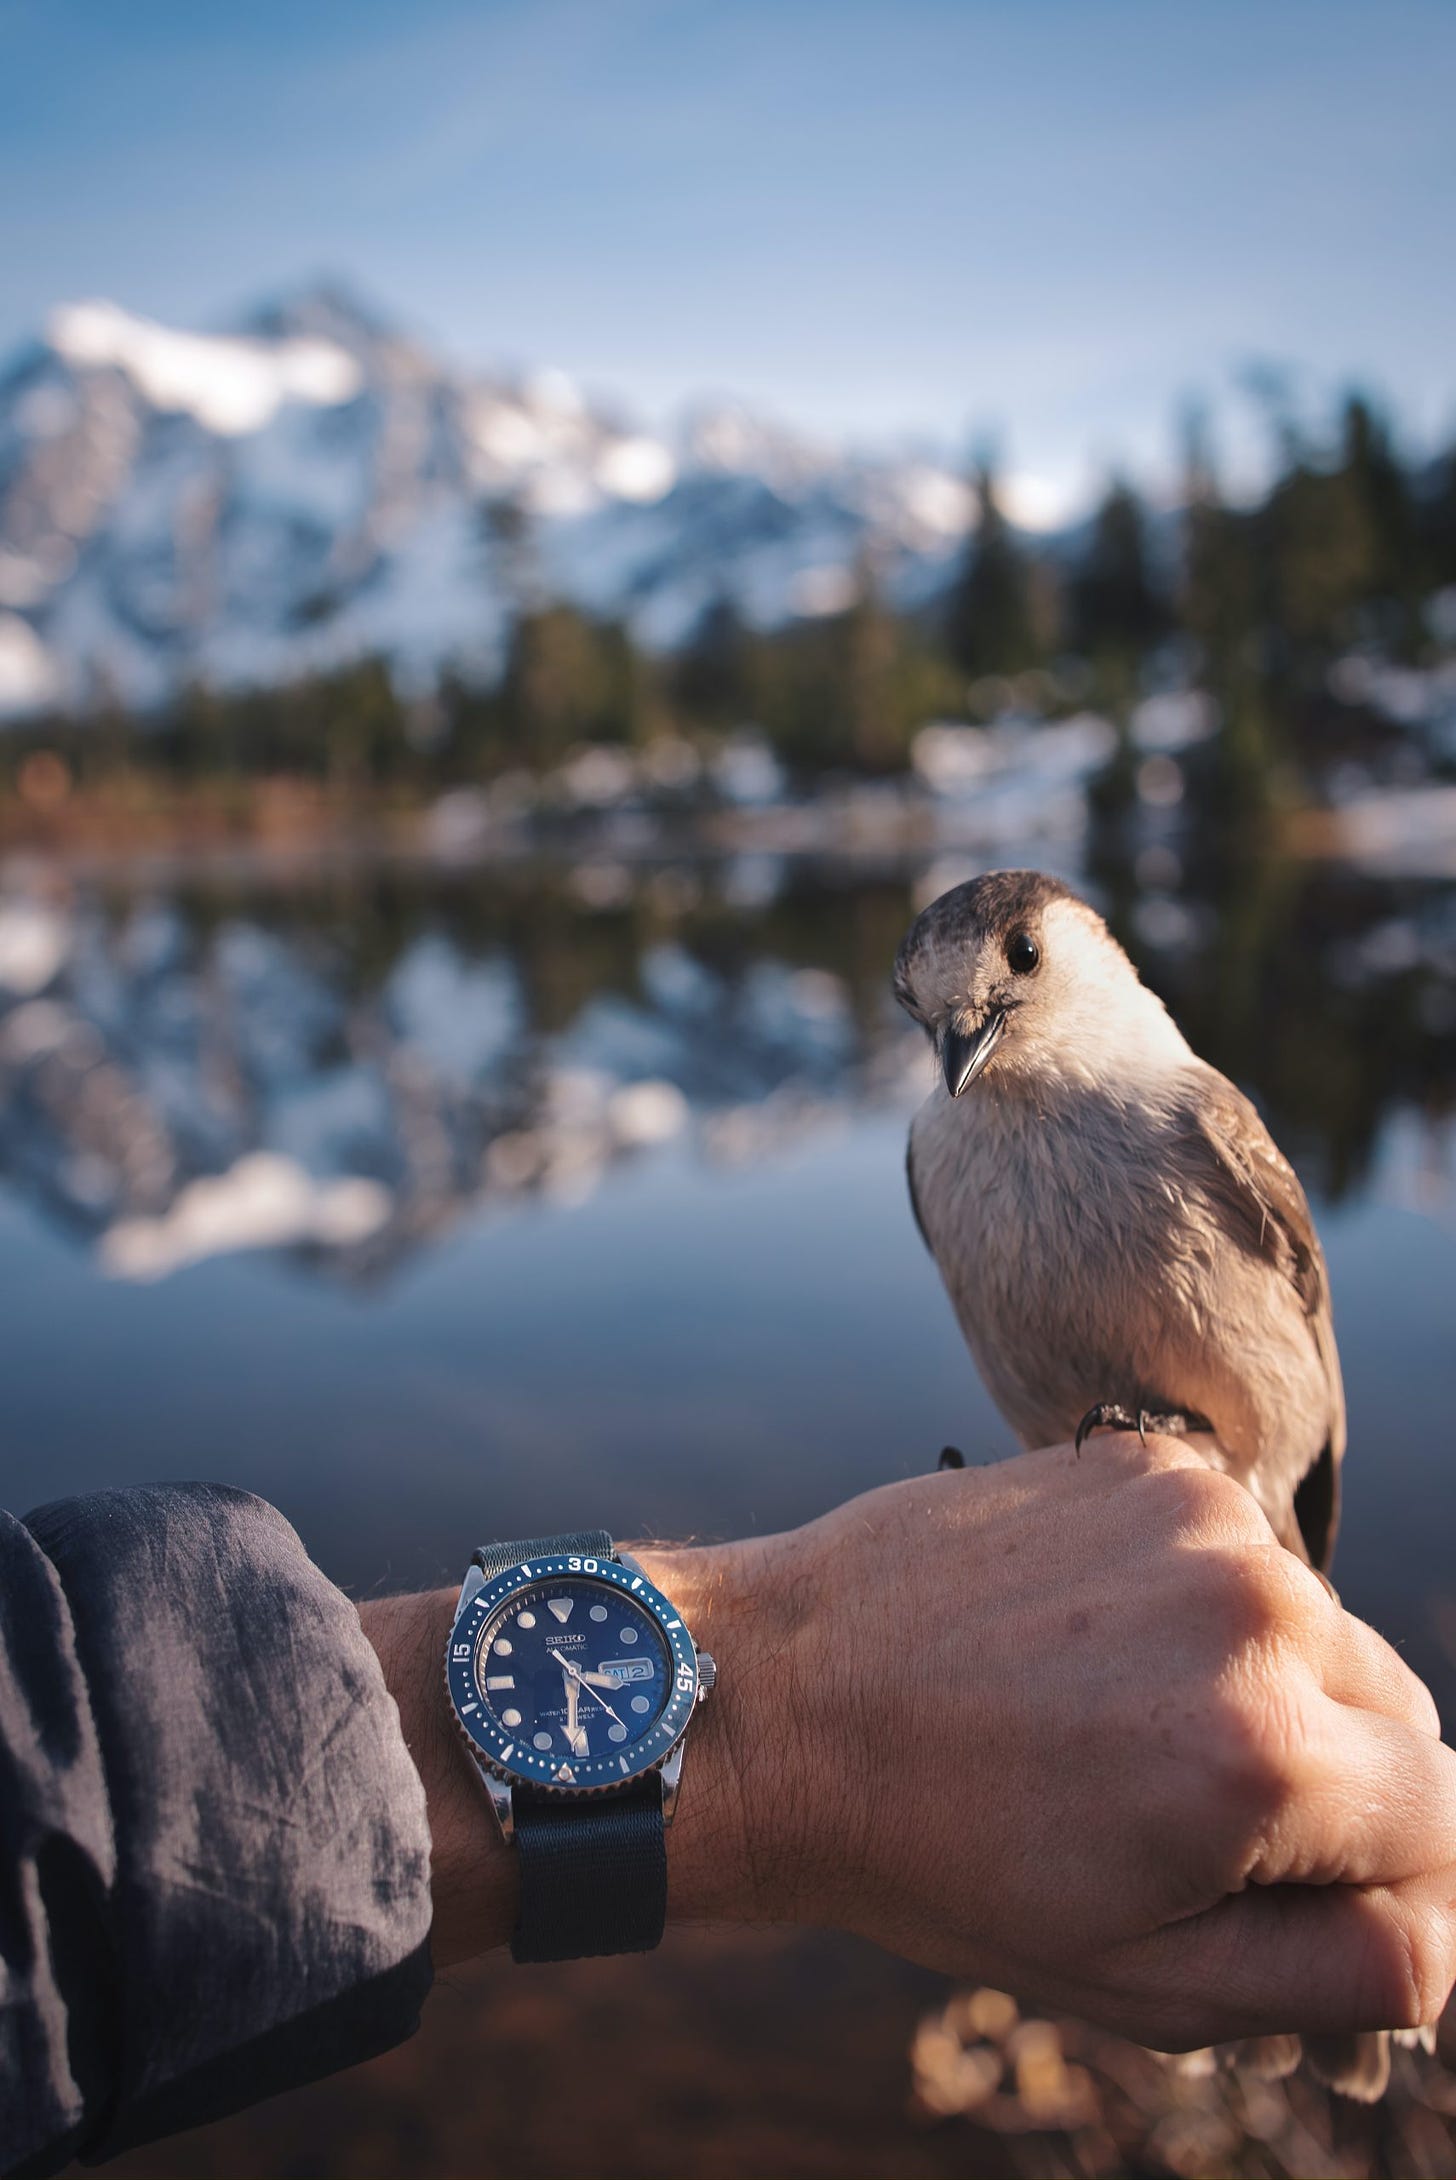 Snow jay on top of a grey sleeve, wrist shot with Mt. Shuksan in background